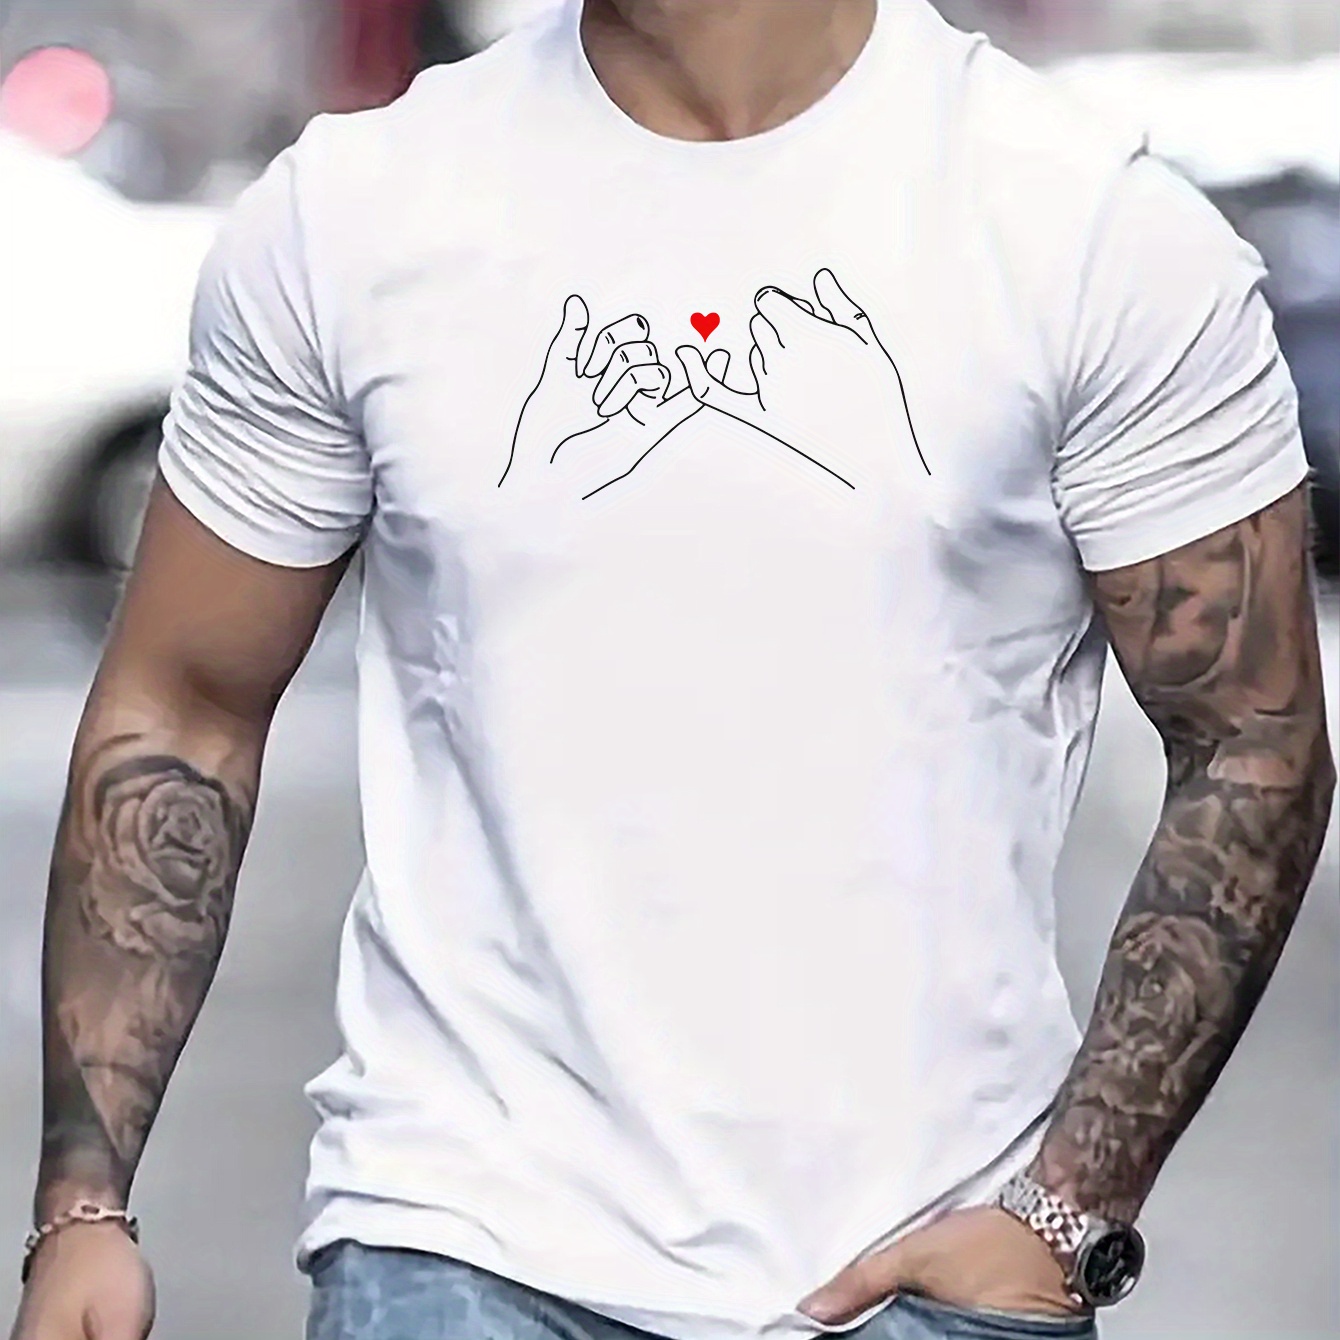 

Pinky Fingers And Heart Graphic Print, Men's Novel Graphic Design T-shirt, Casual Comfy Tees For Summer, Men's Clothing Tops For Daily Activities